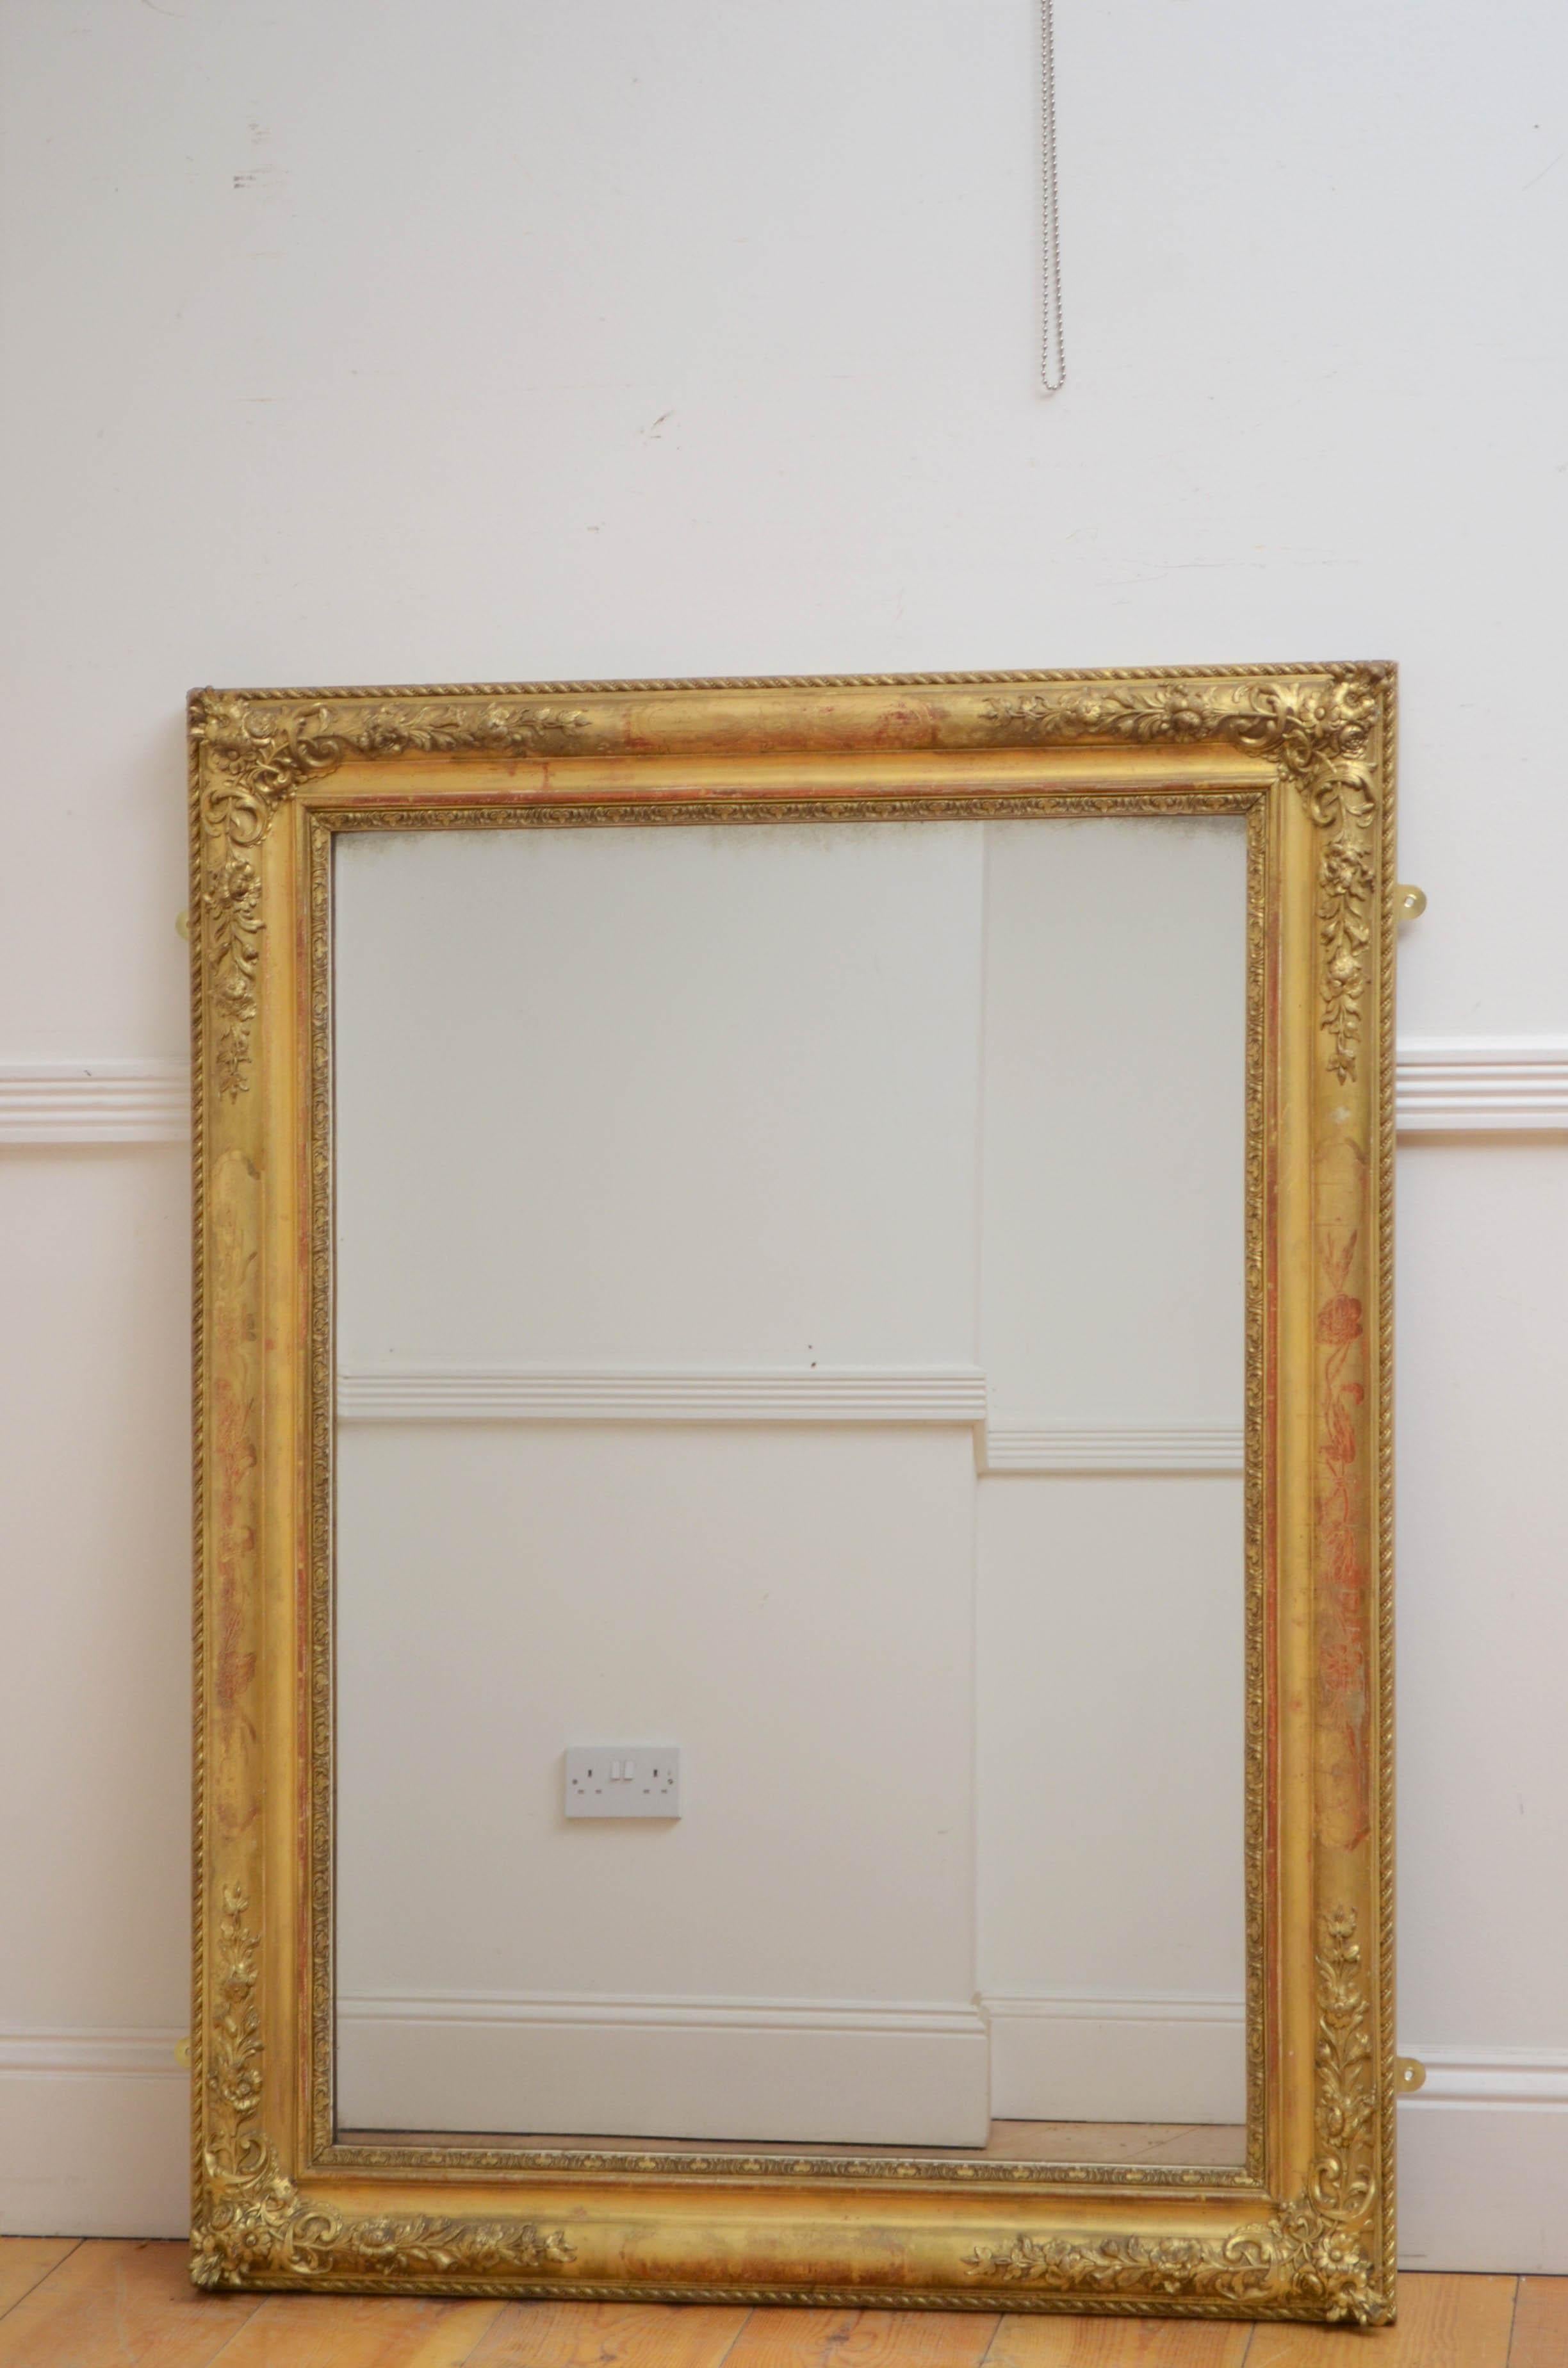 0227 Outstanding French gilded wall mirror, having original glass with air bubbles and minor silvering in moulded giltwood frame with flowery corners and leaf scrolls engravings. This antique mirror retains its original glass, original gilt and